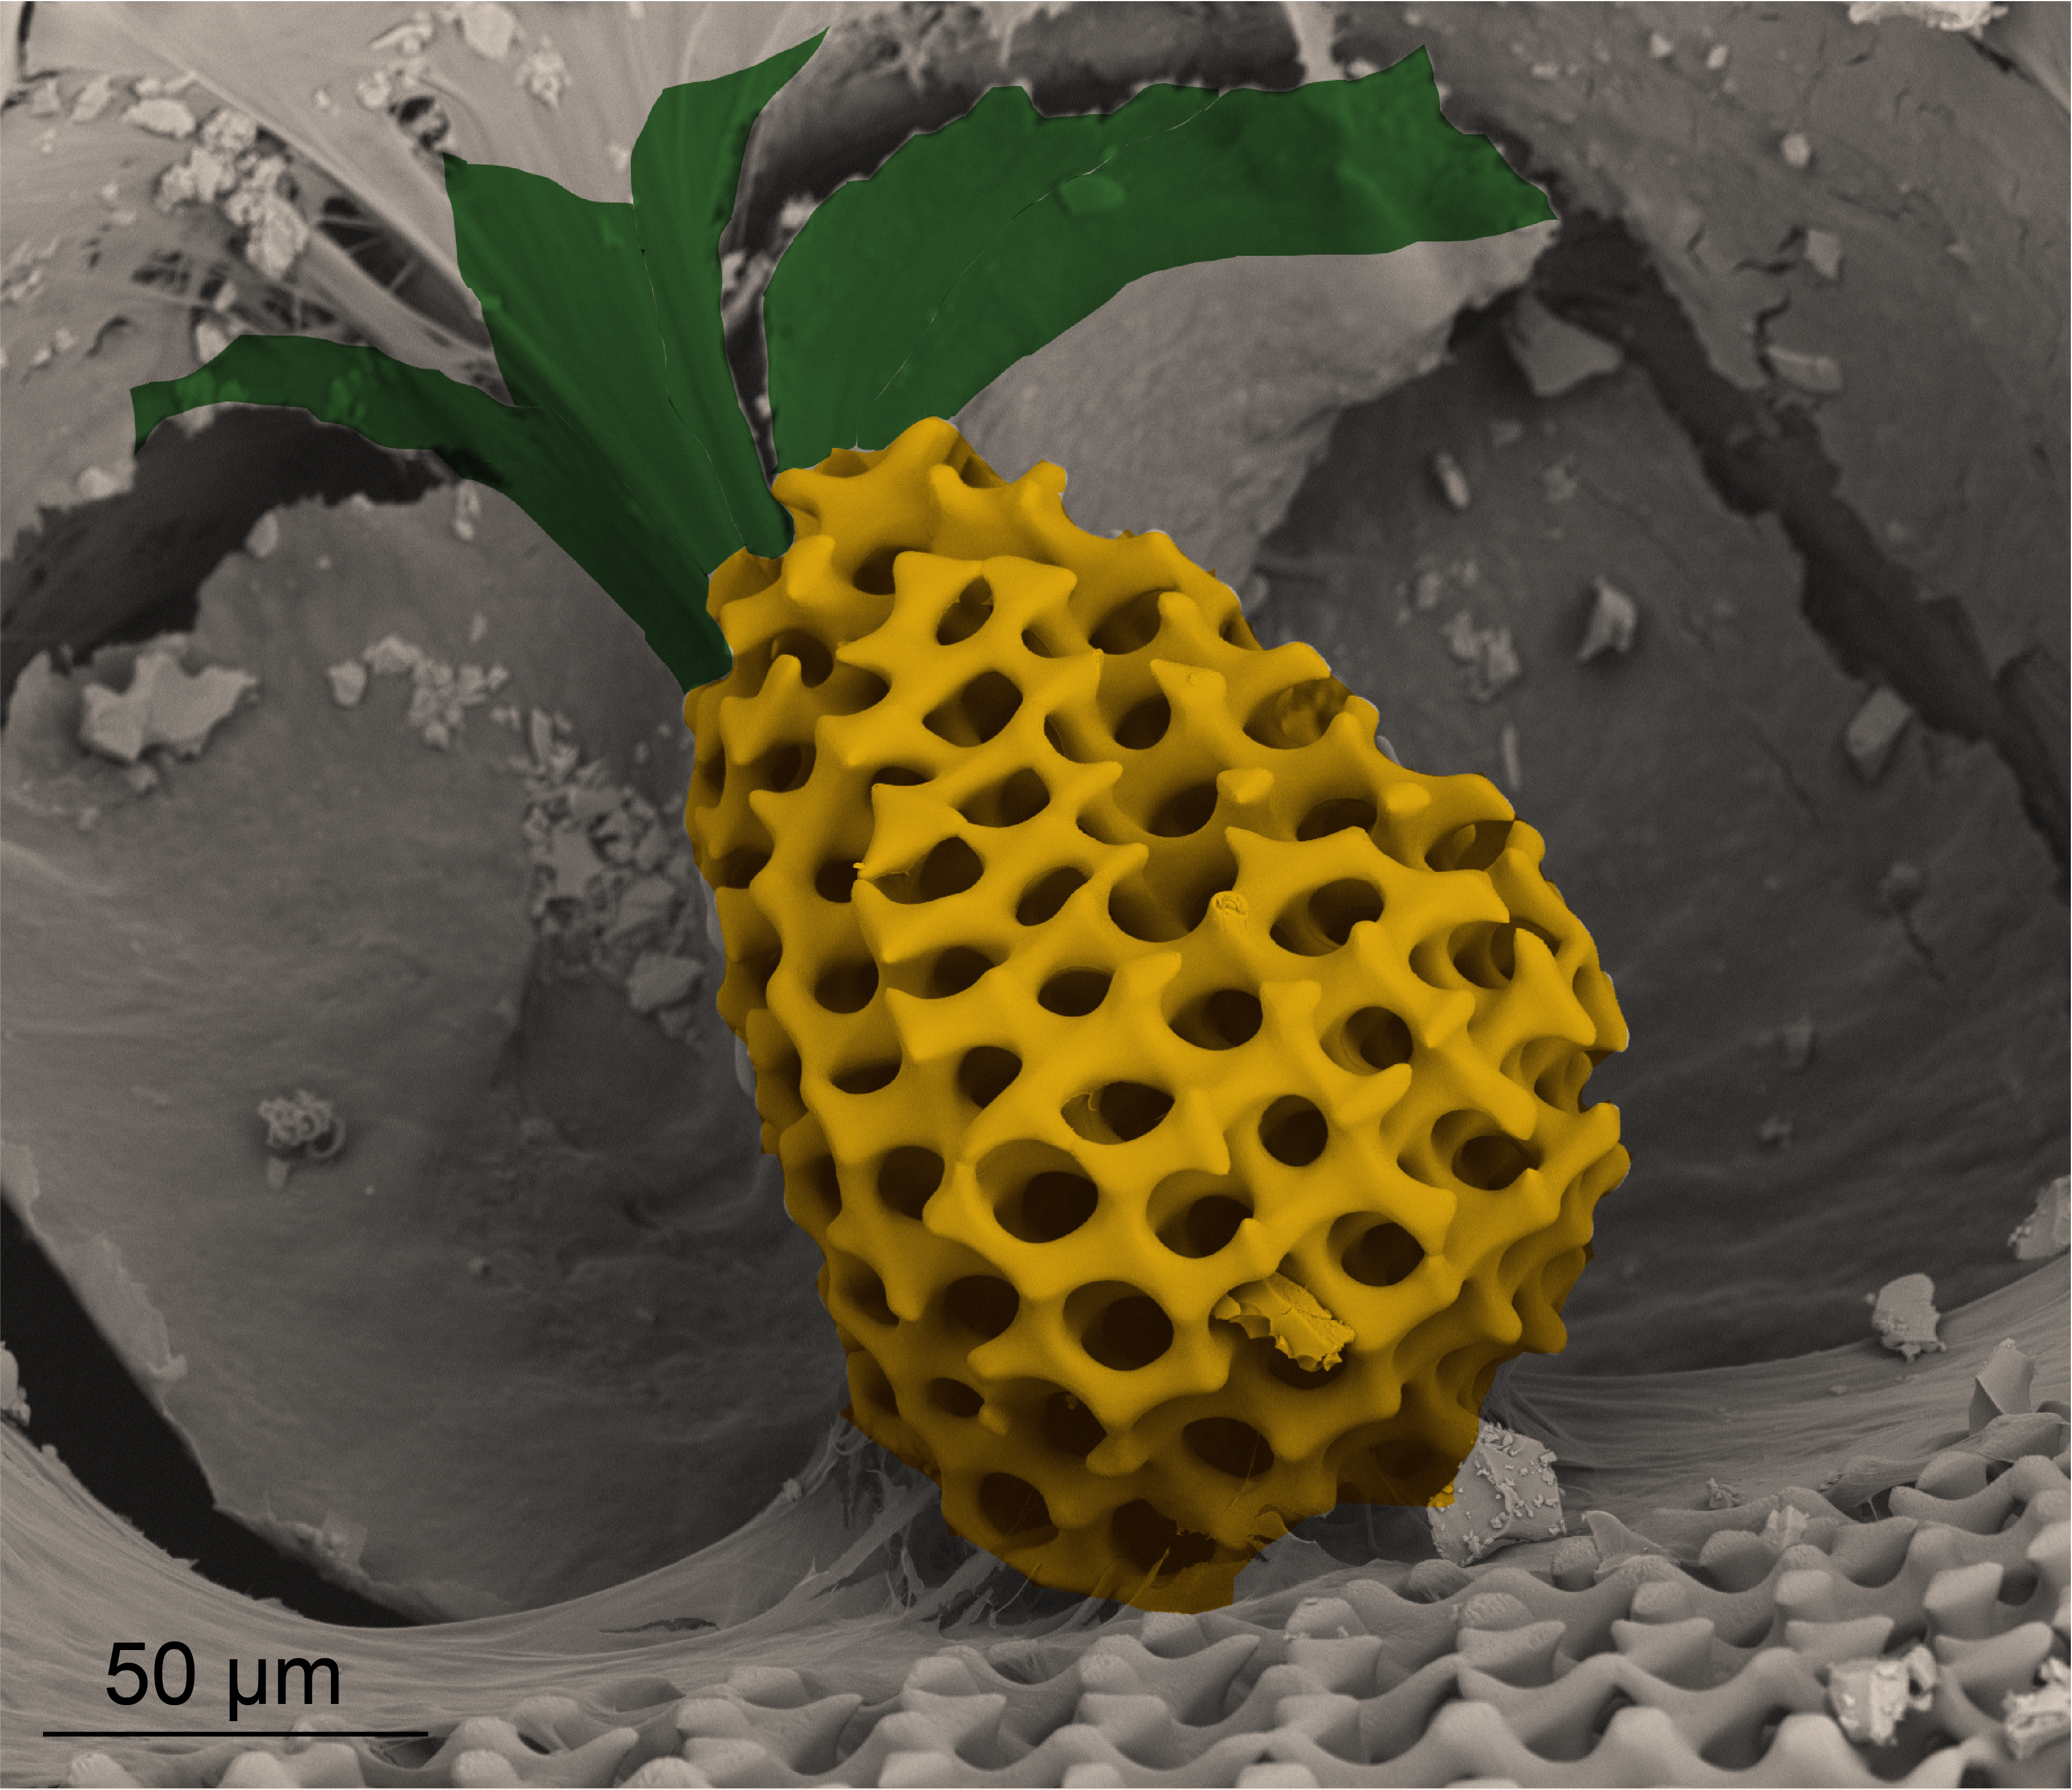 scanning electron microscopy image of the porous structure of a starfish’s mineralized skeleton